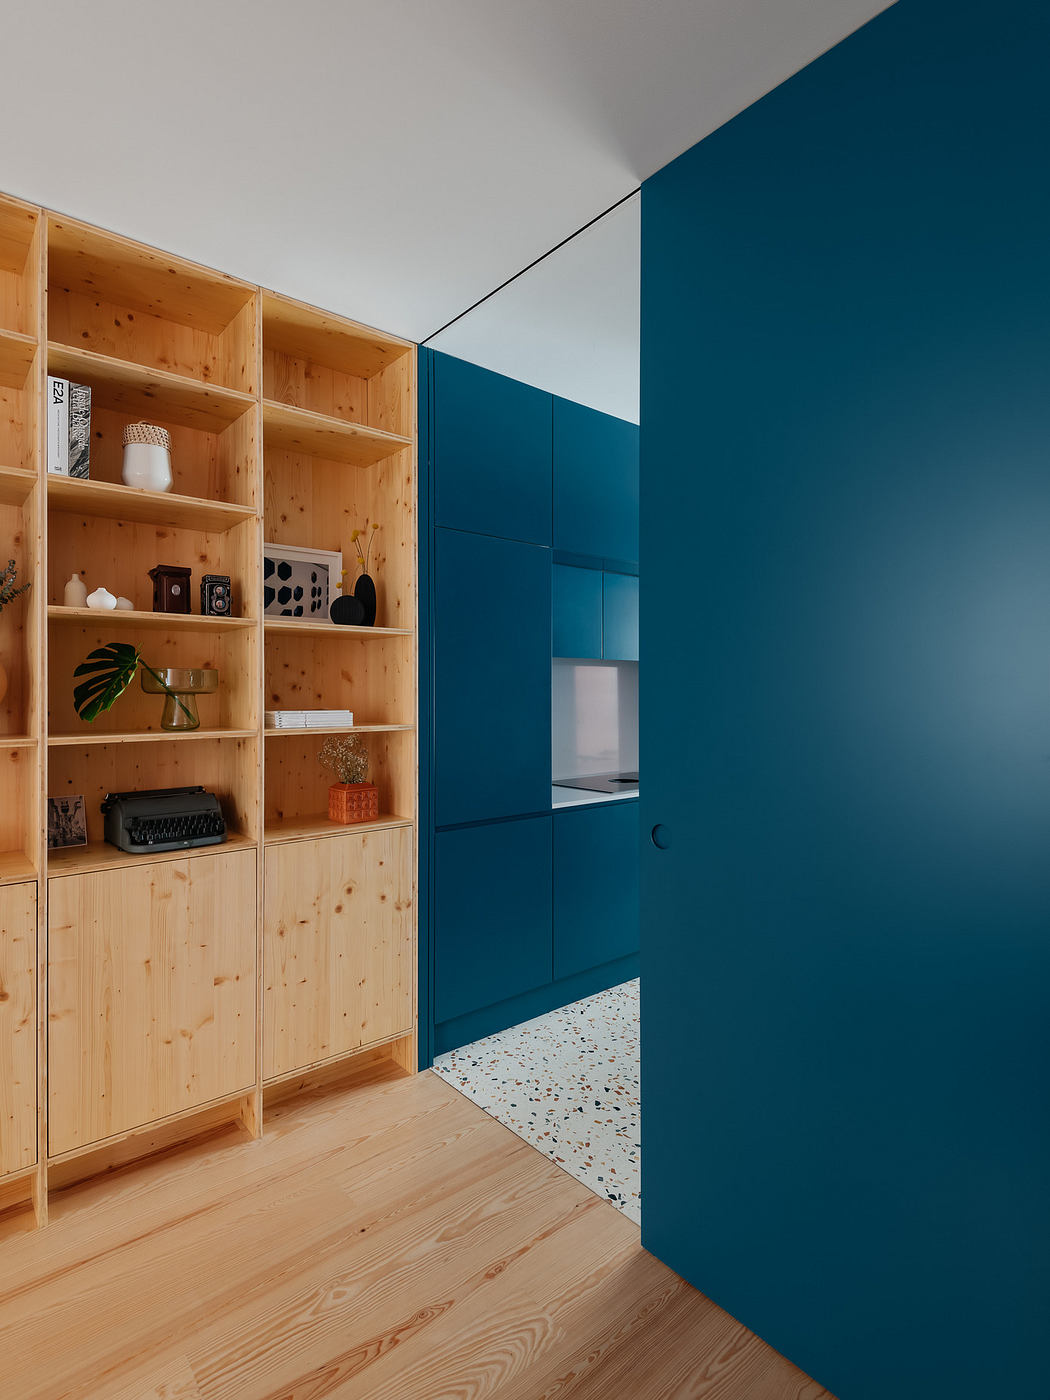 Contemporary room with bold blue wall and wooden bookshelf.